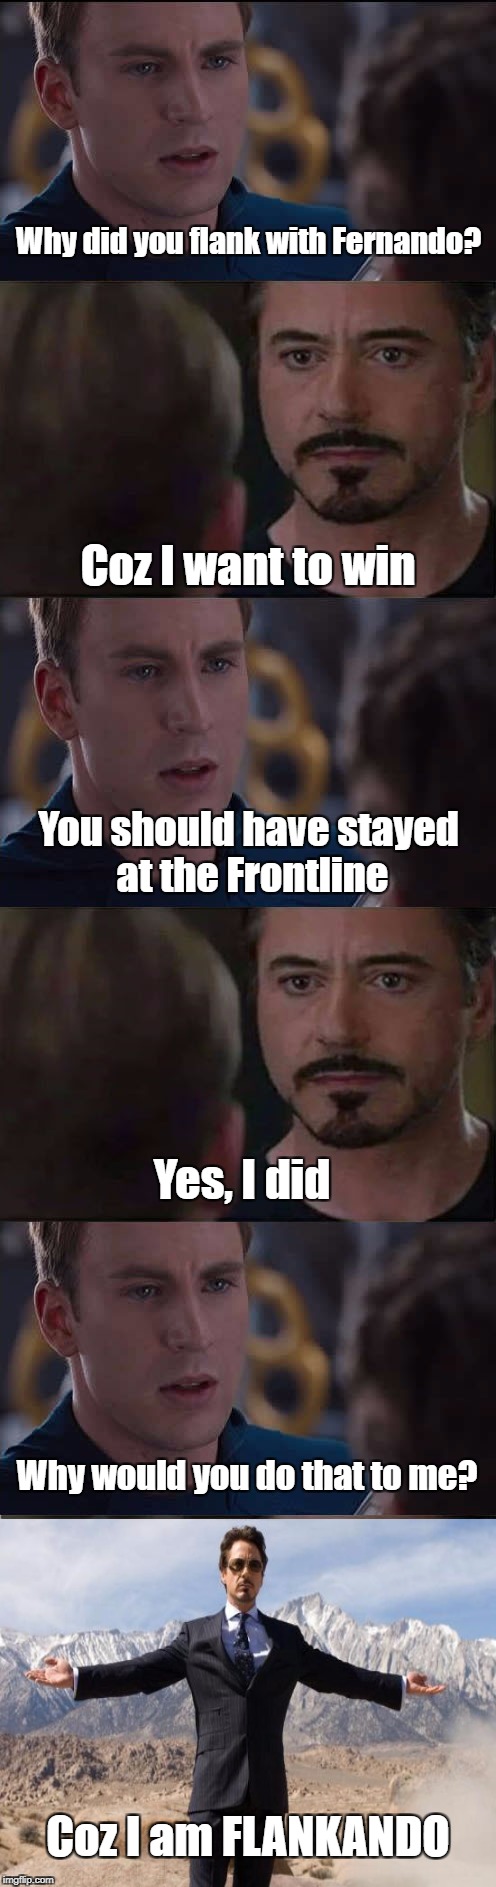 Why did you flank with Fernando? Coz I want to win; You should have stayed at the Frontline; Yes, I did; Why would you do that to me? Coz I am FLANKANDO | image tagged in ironman swag | made w/ Imgflip meme maker